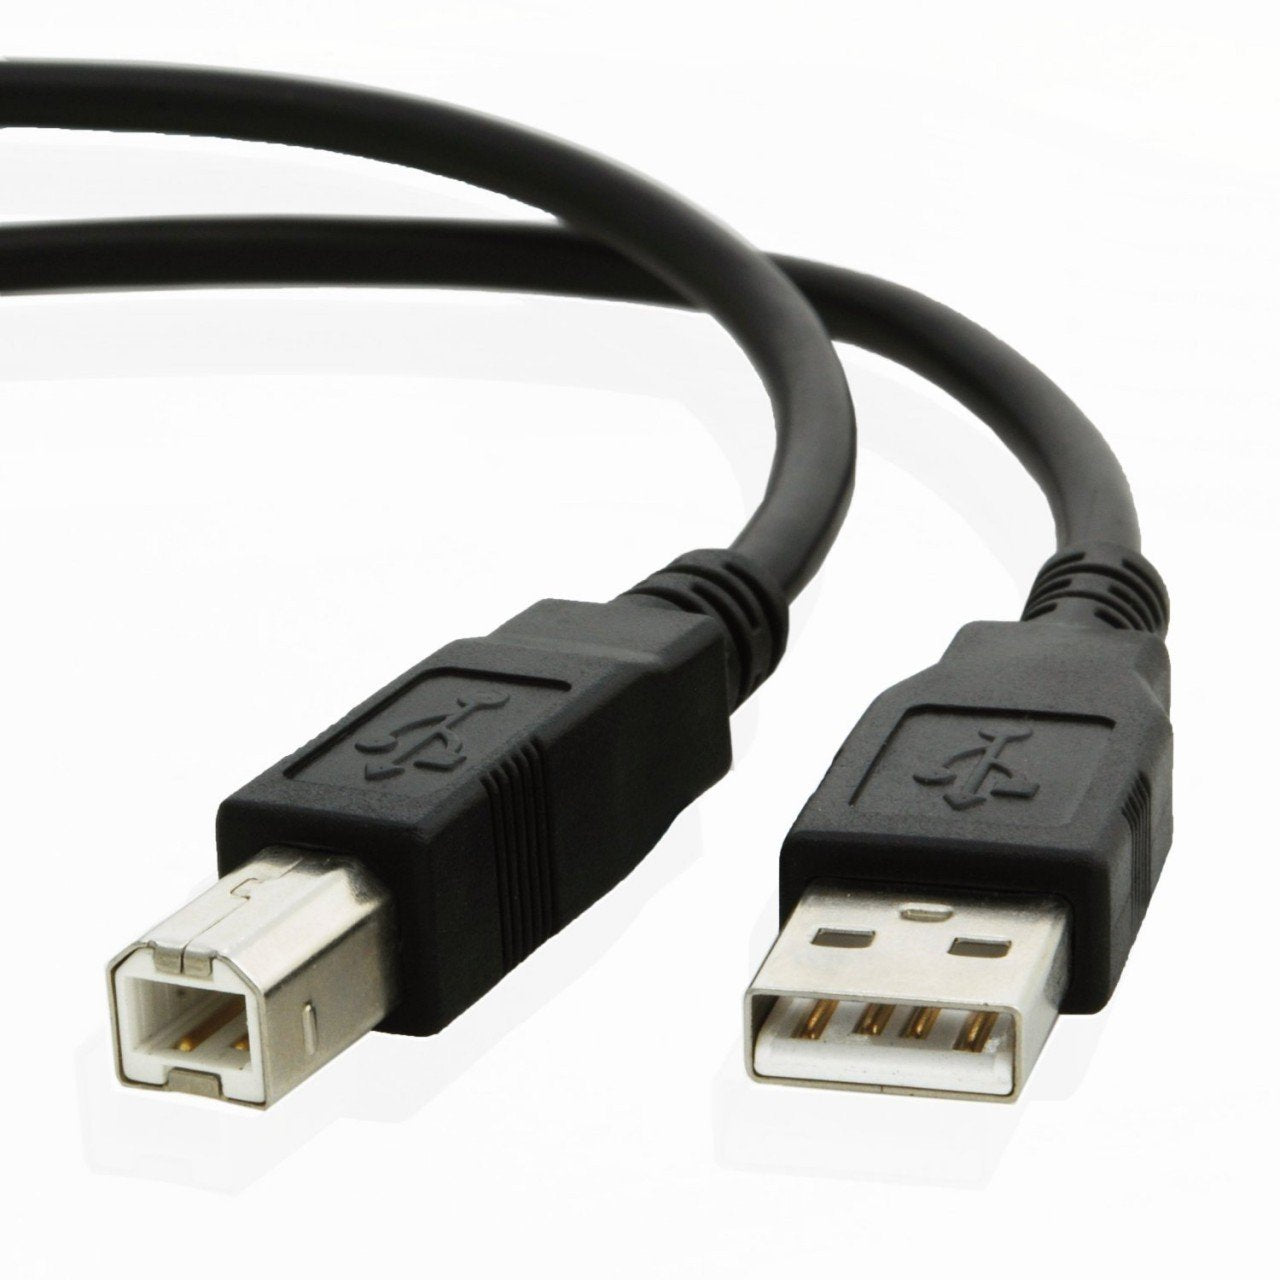 USB cable for Epson SURECOLOR P400